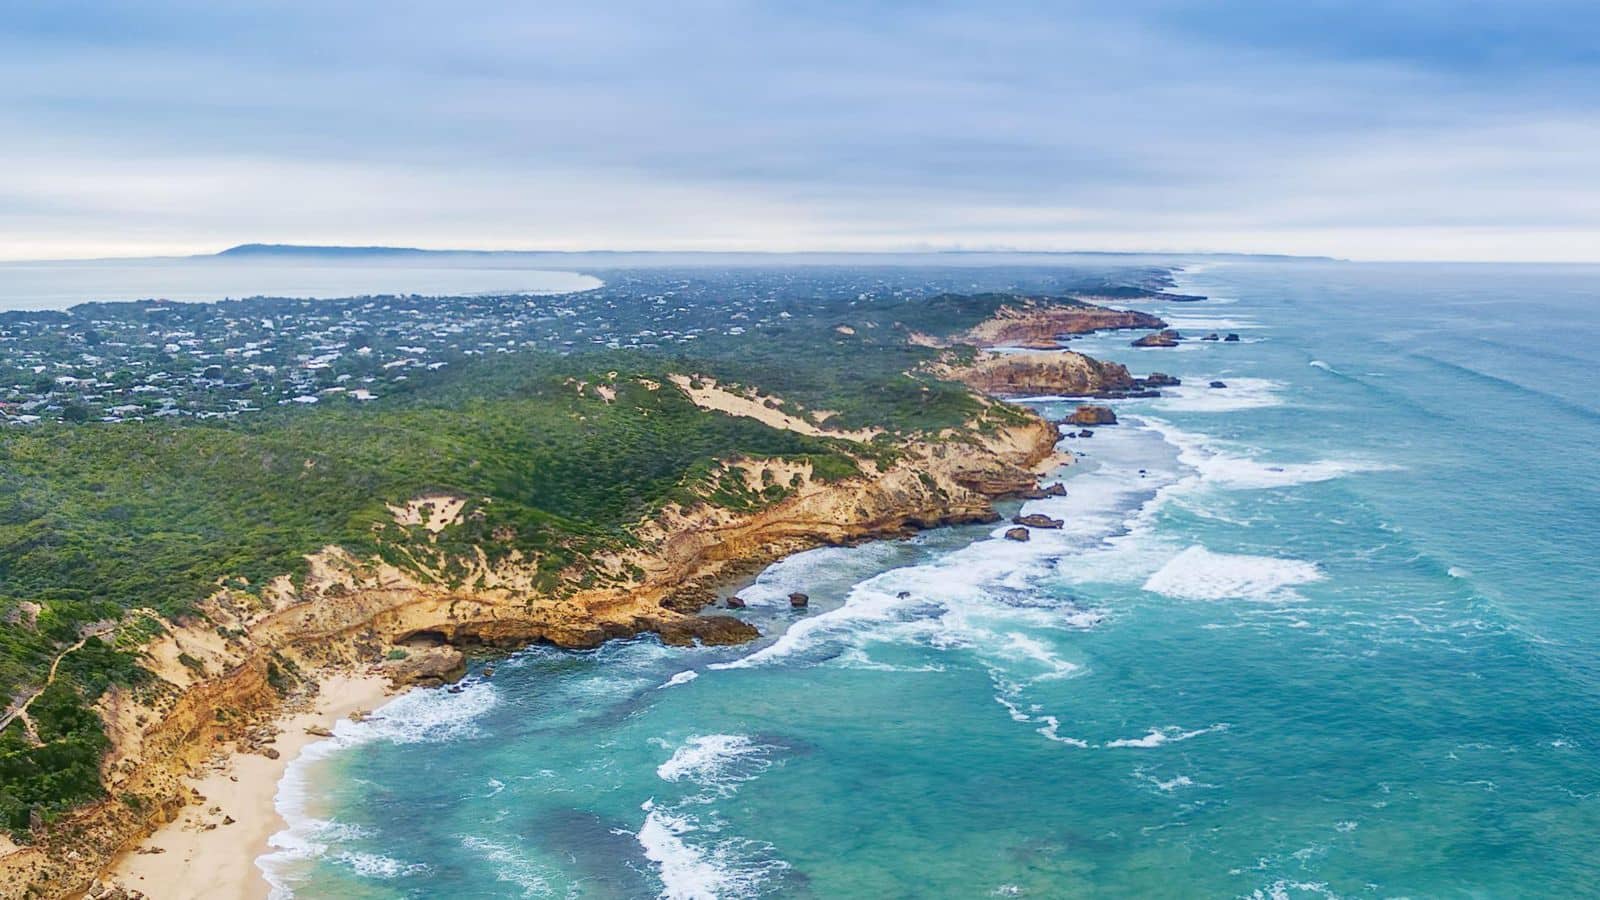 Melbourne's coastal charm and countryside jaunts